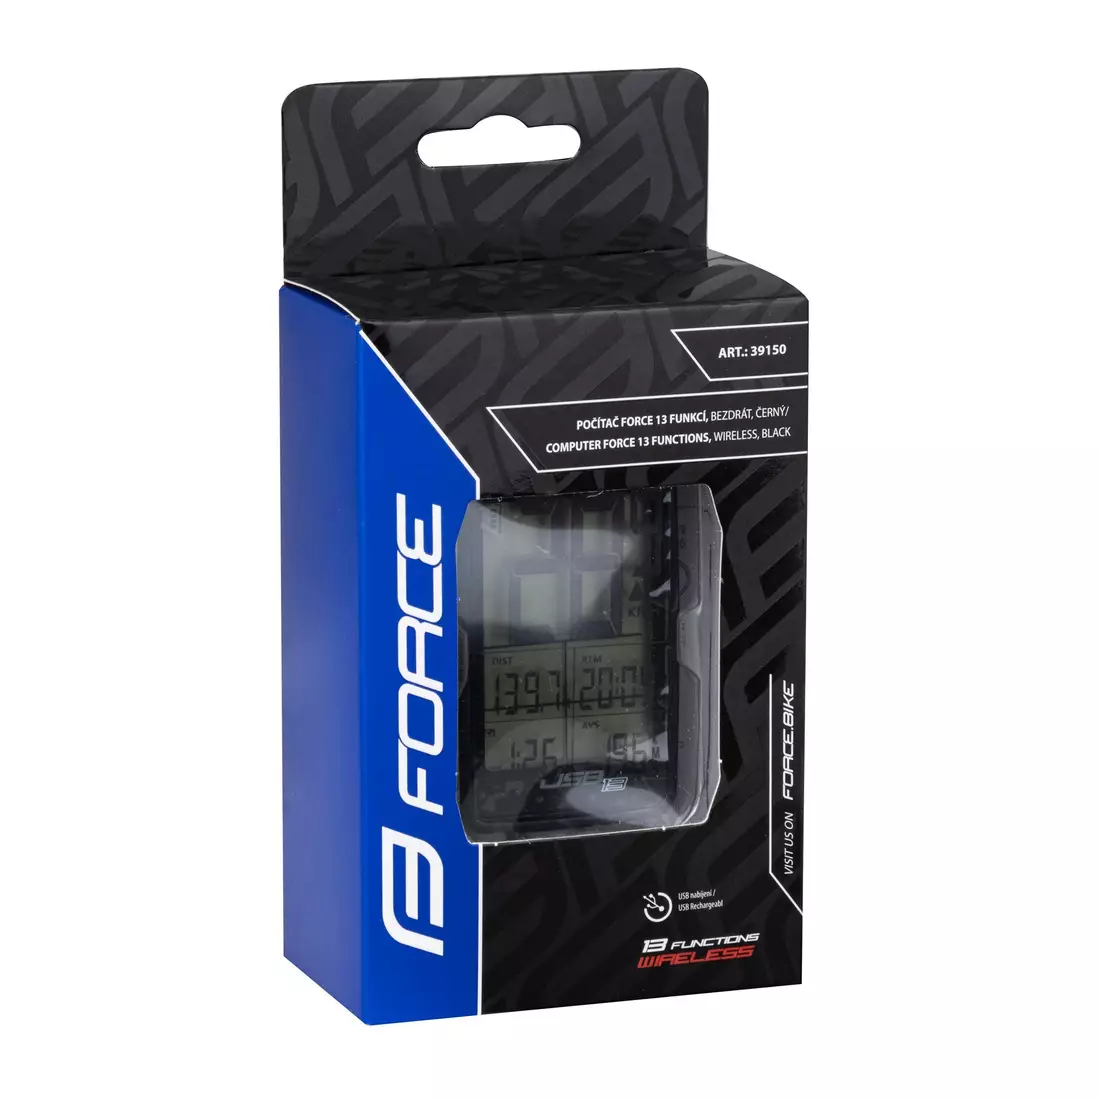 FORCE Wireless bicycle computer USB 13 F, black 39150